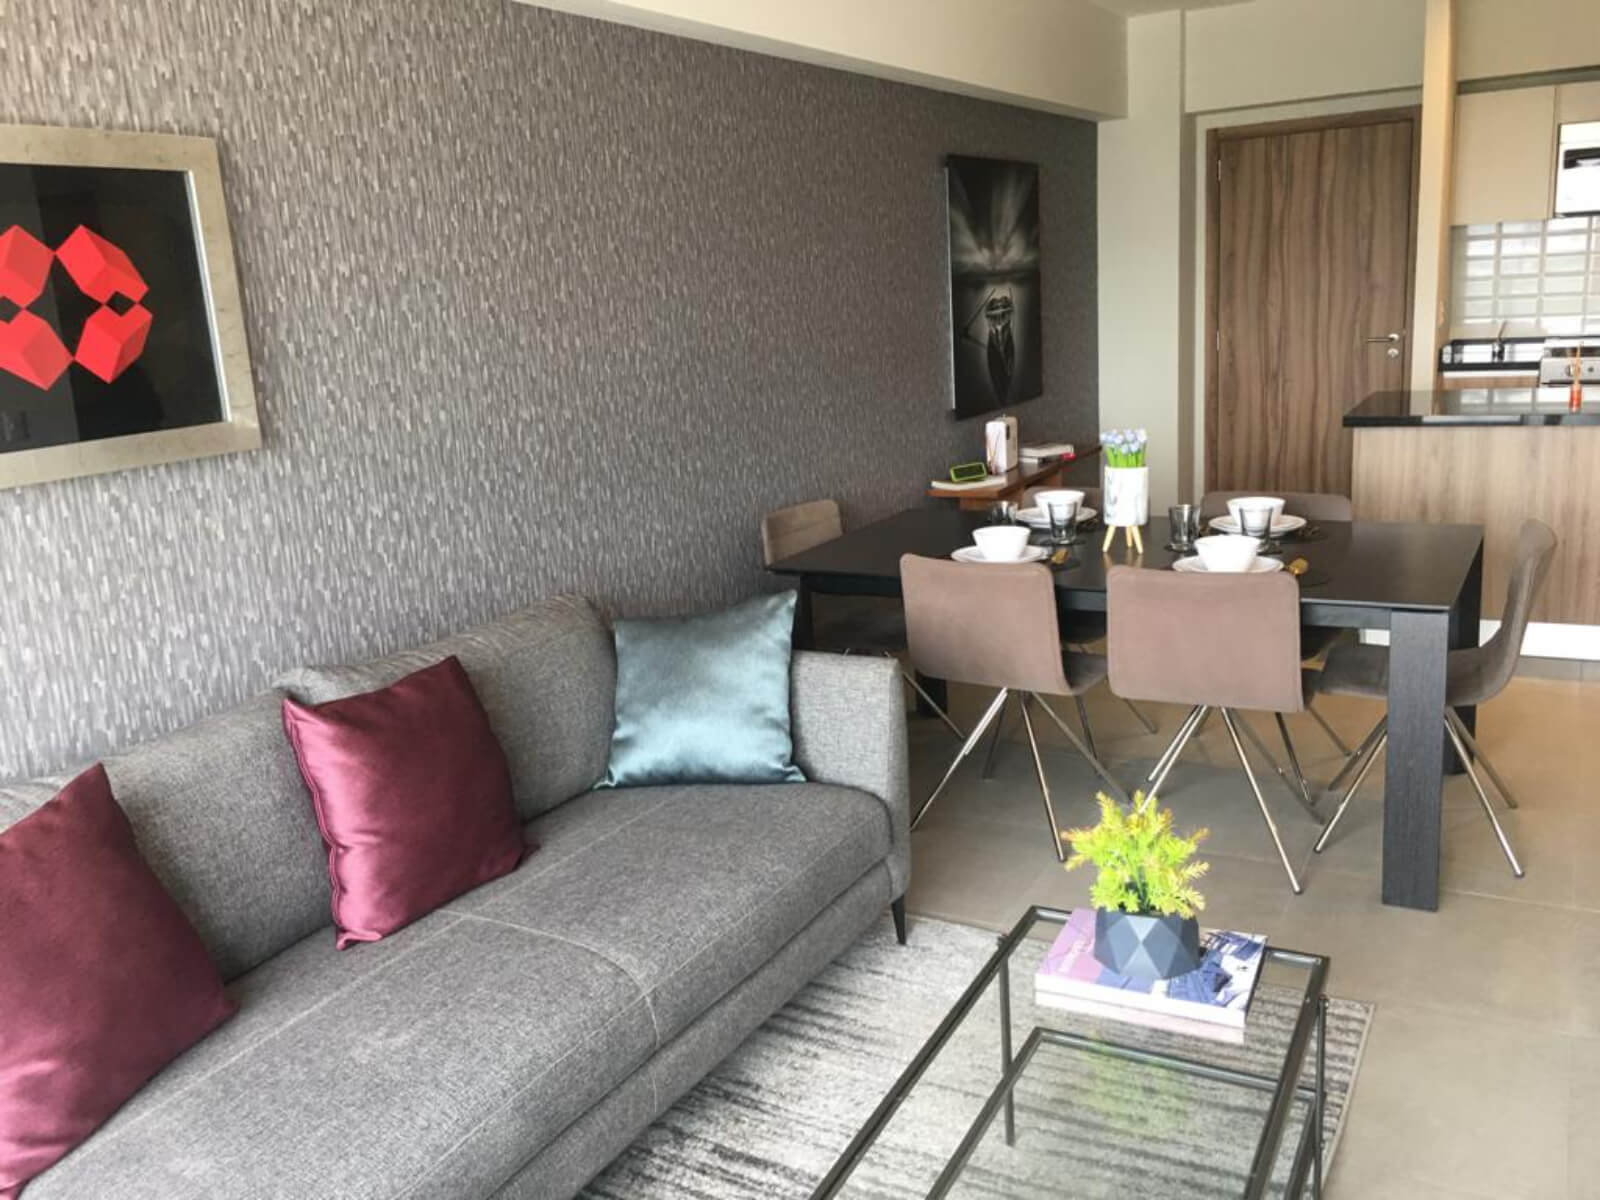 Apartment with playground, adult area, pet-friendly, gym for sale in CDMX.